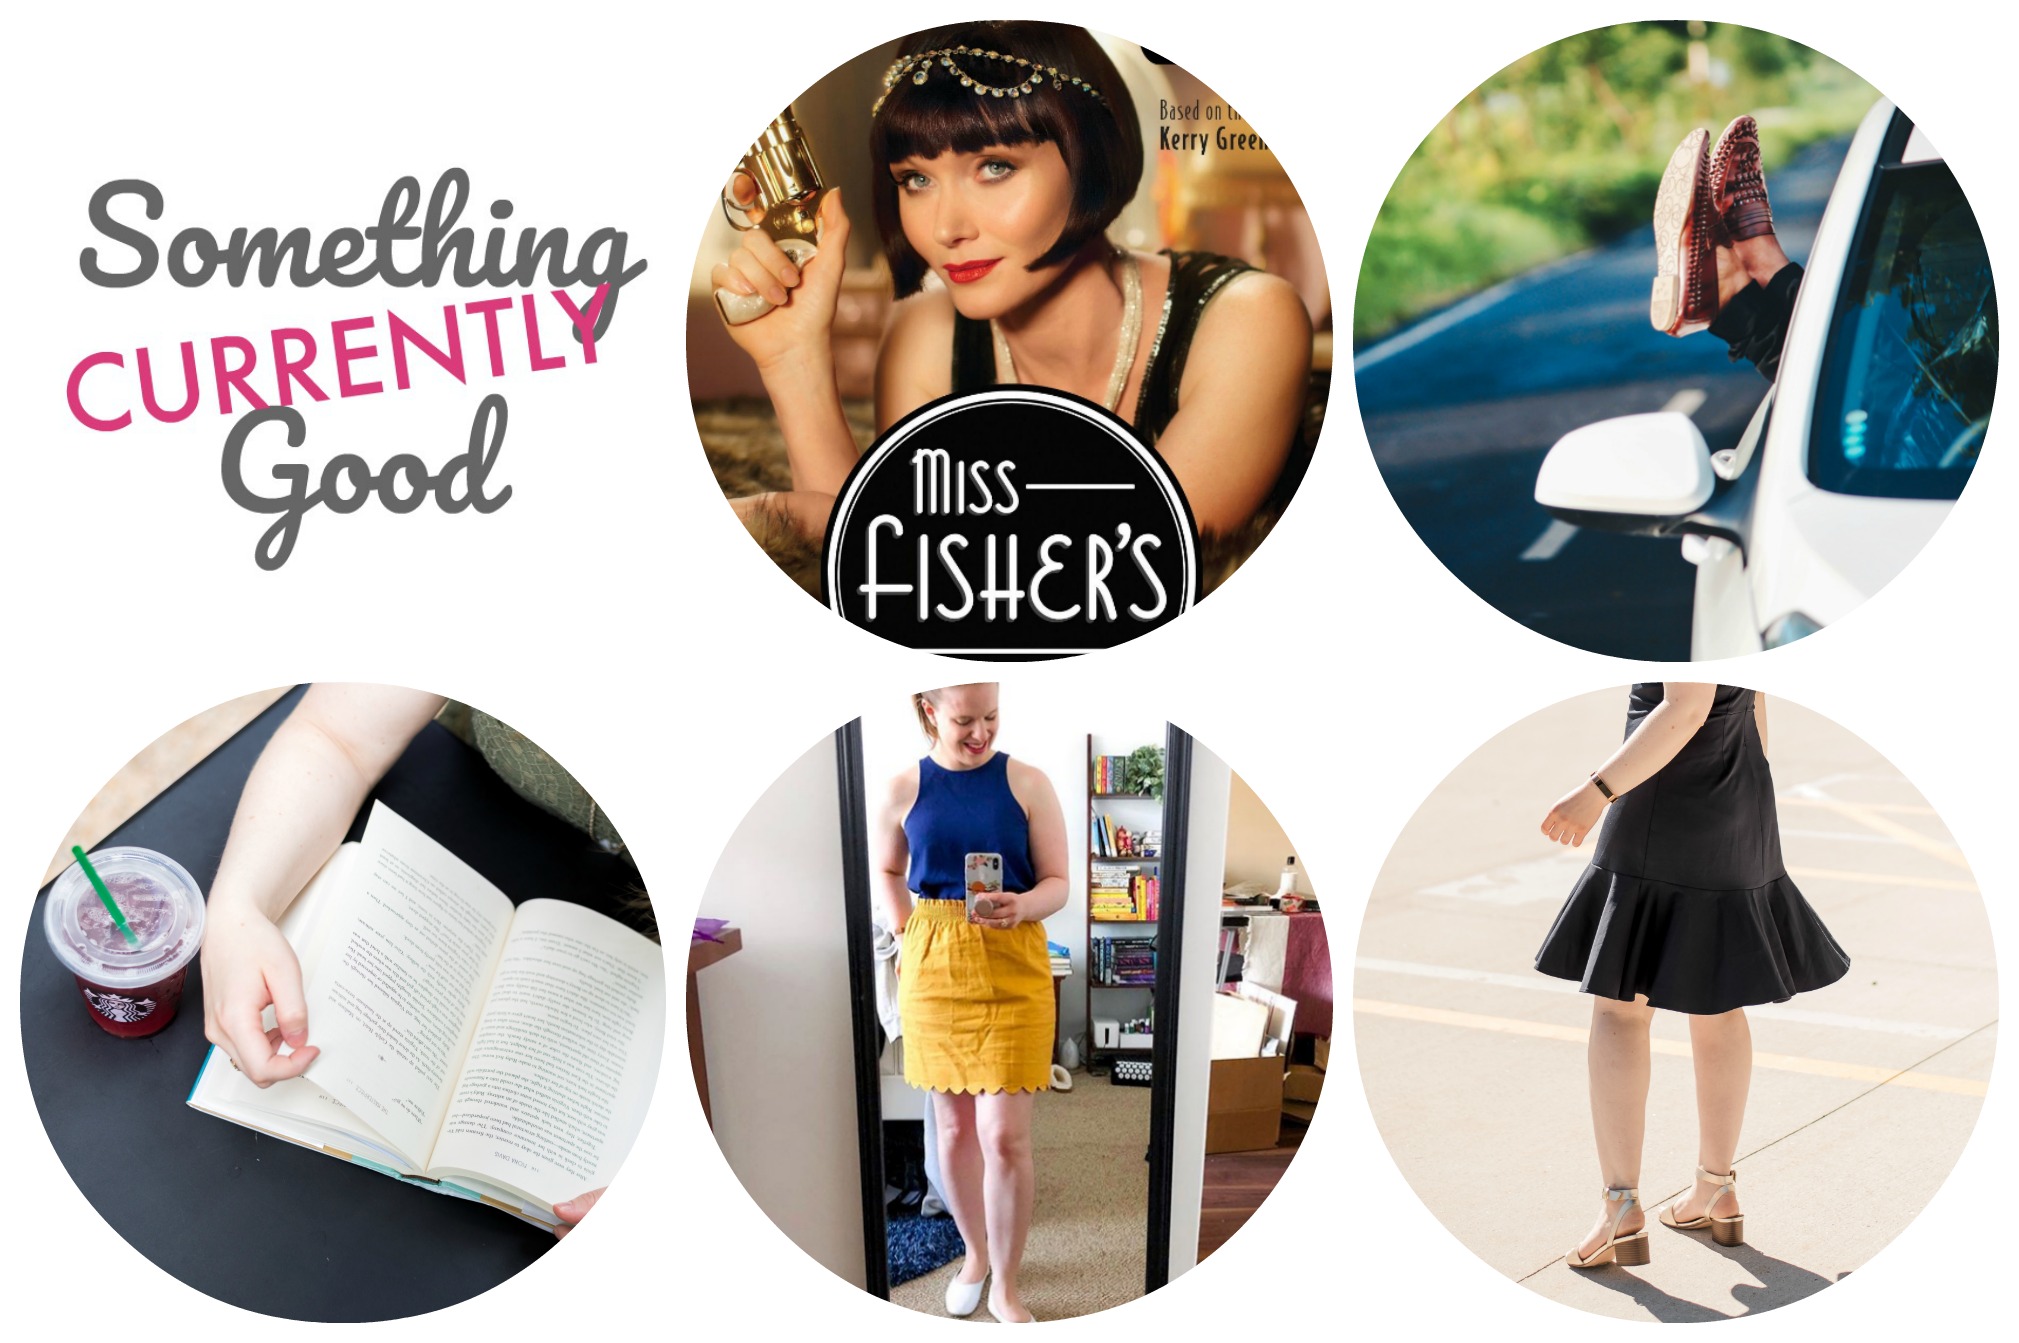 Miss Fisher's Murder Mysteries, dc woman blogger wearing everlane goweave blue tank and yellow scallop j.crew factory skirt, open book on table, dress twirling, gold single strap heels